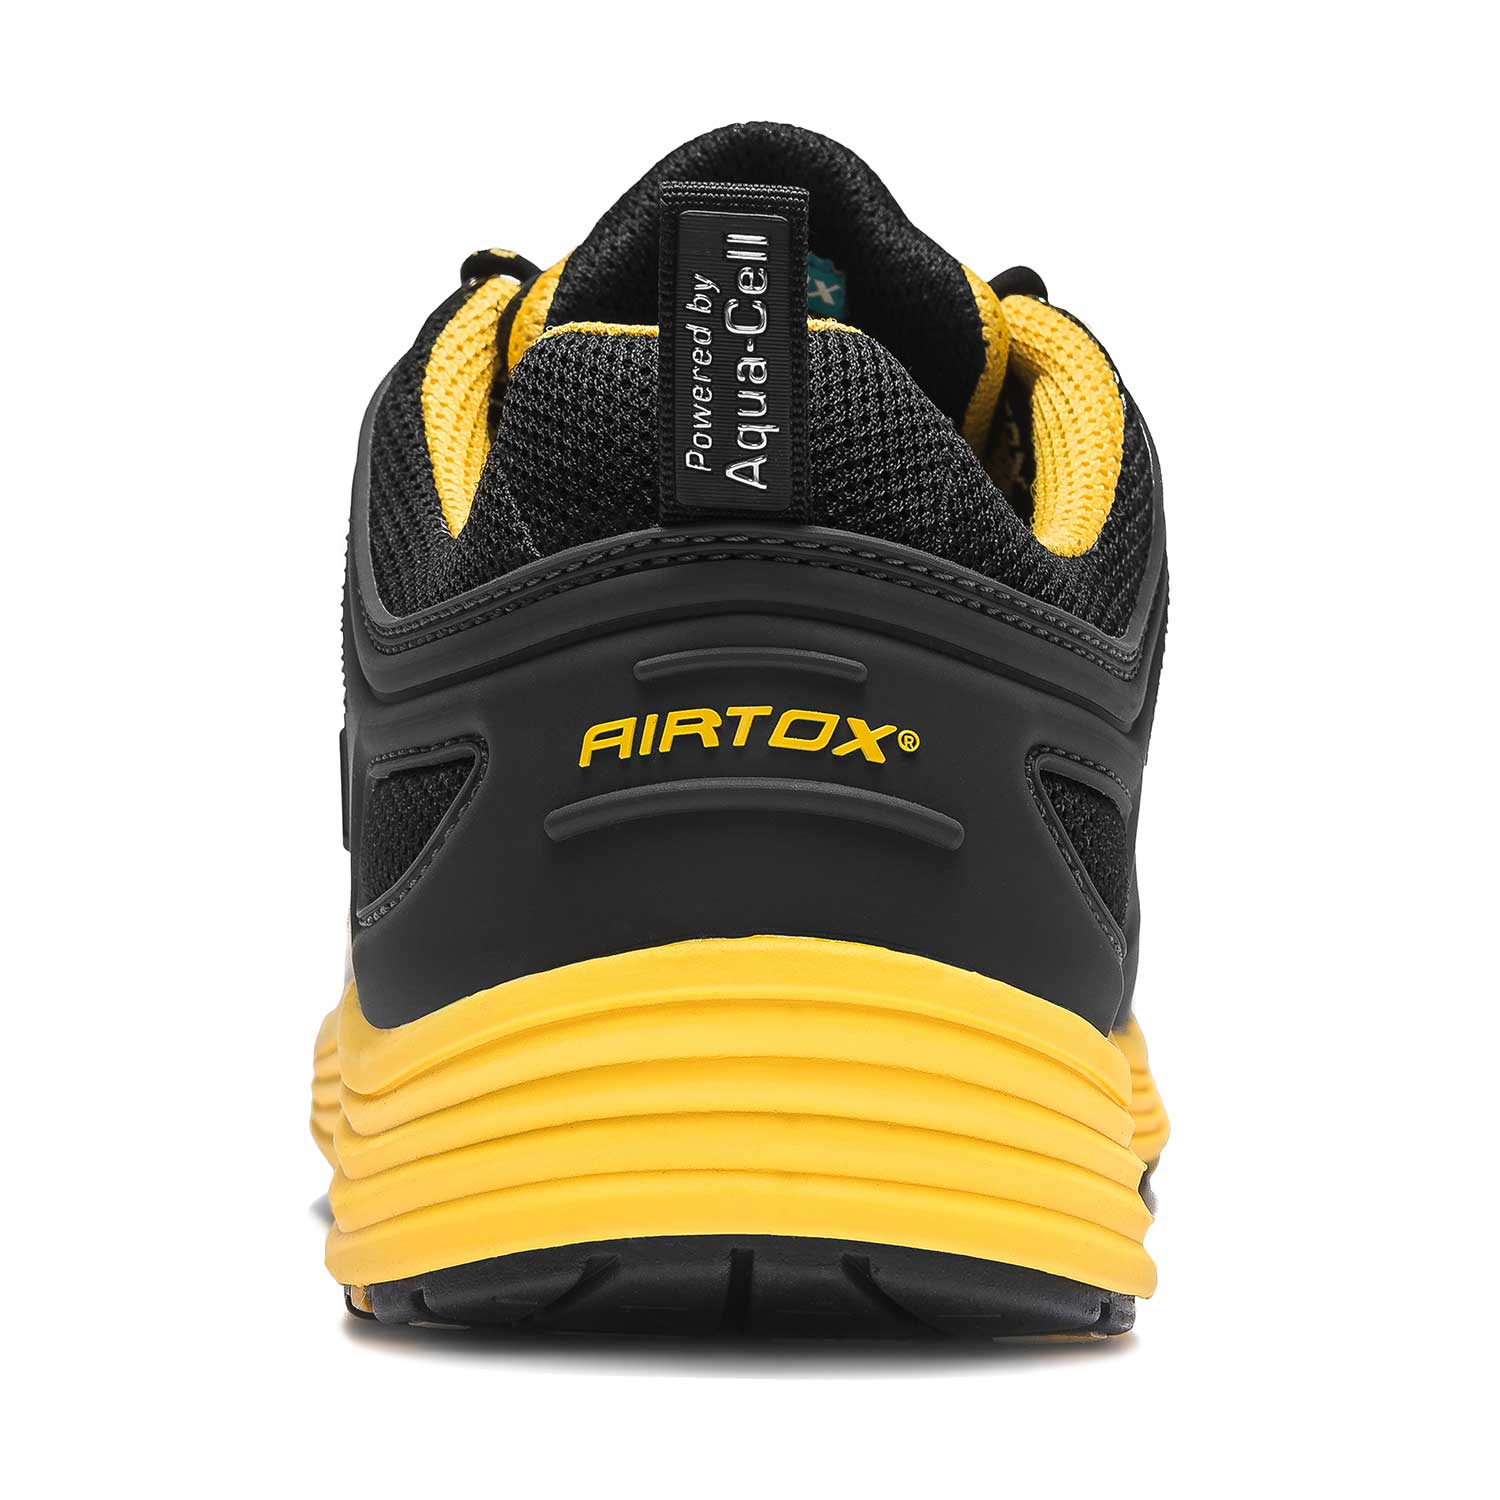 MA6 waterproof safety shoes | Airtox